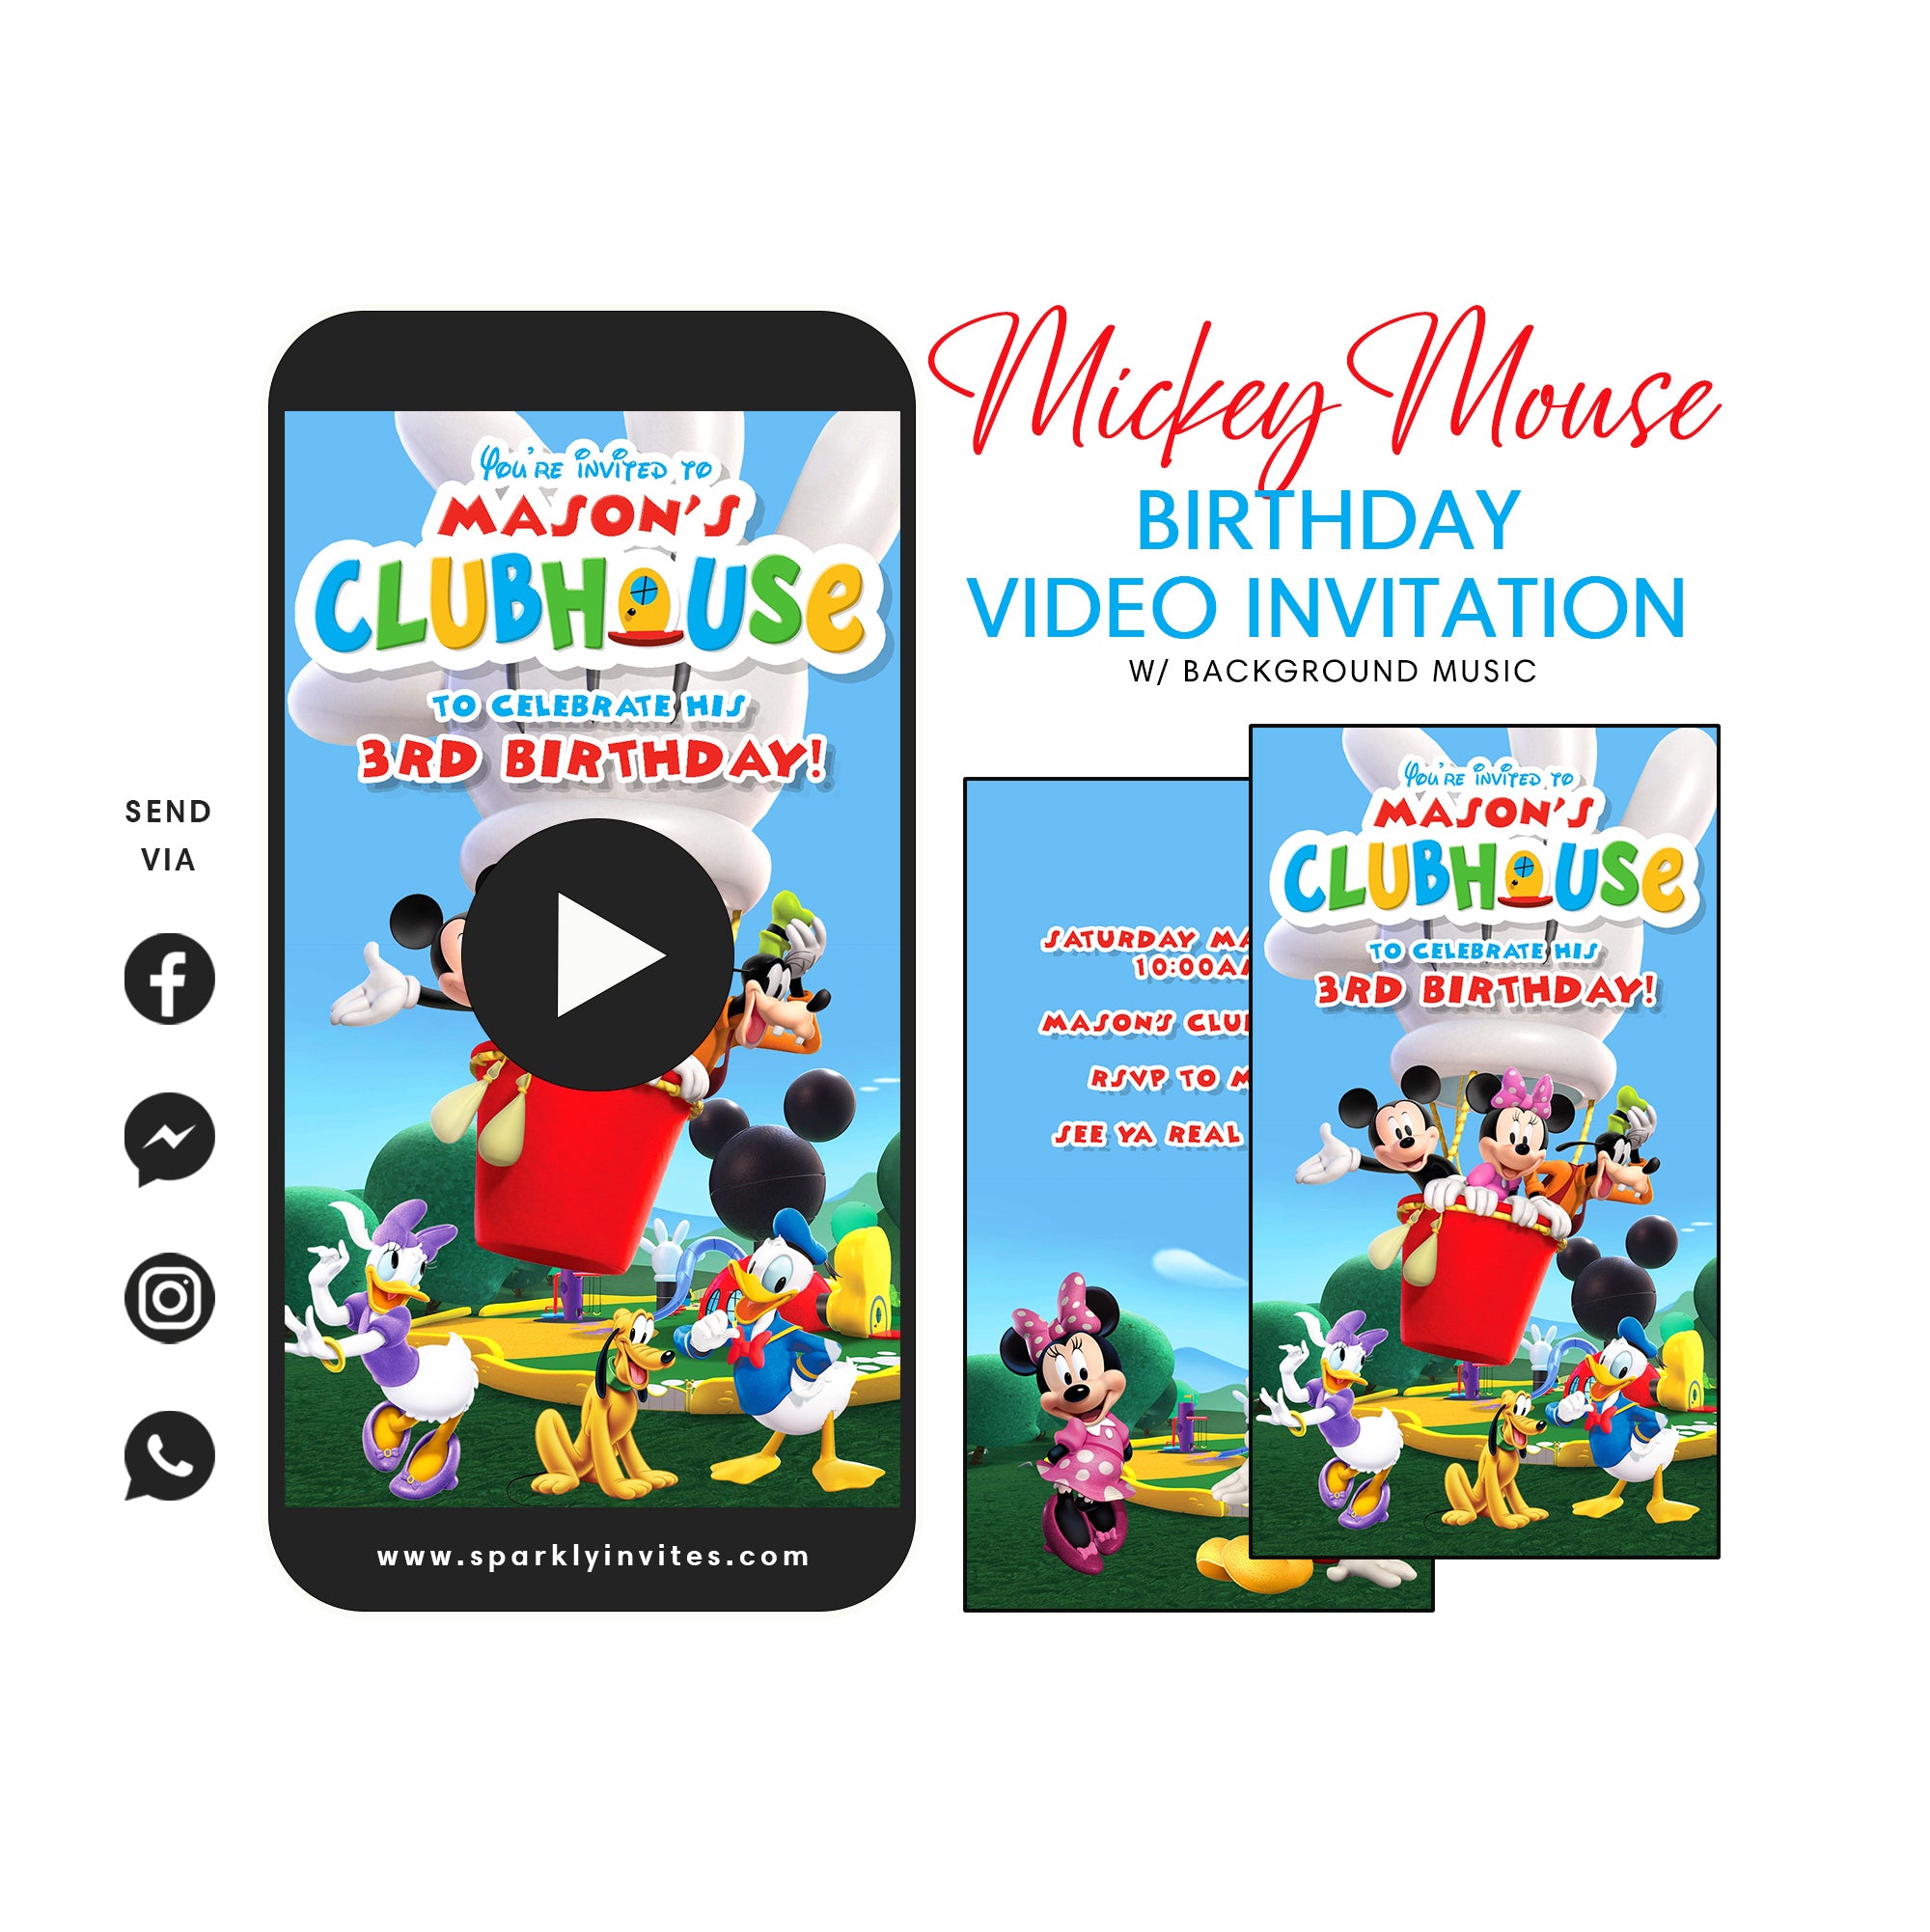 mickey mouse clubhouse logo font